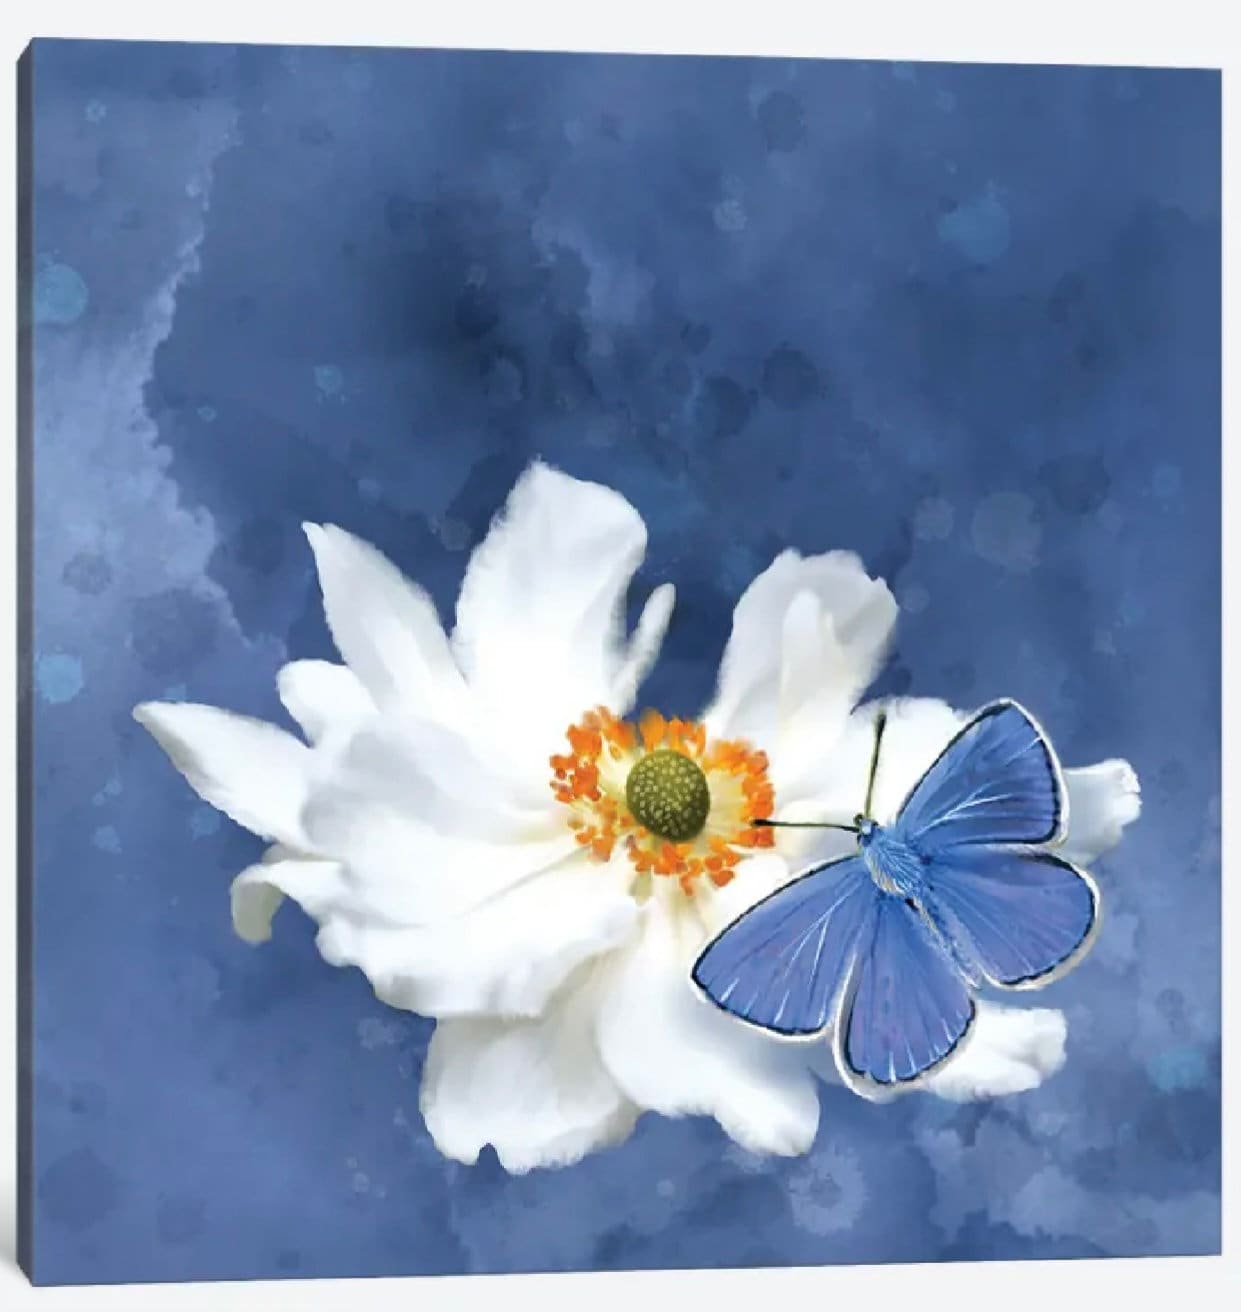 Blue Butterfly White Flower by Thomas Little - 16 x 16 inches - Framed Art Print